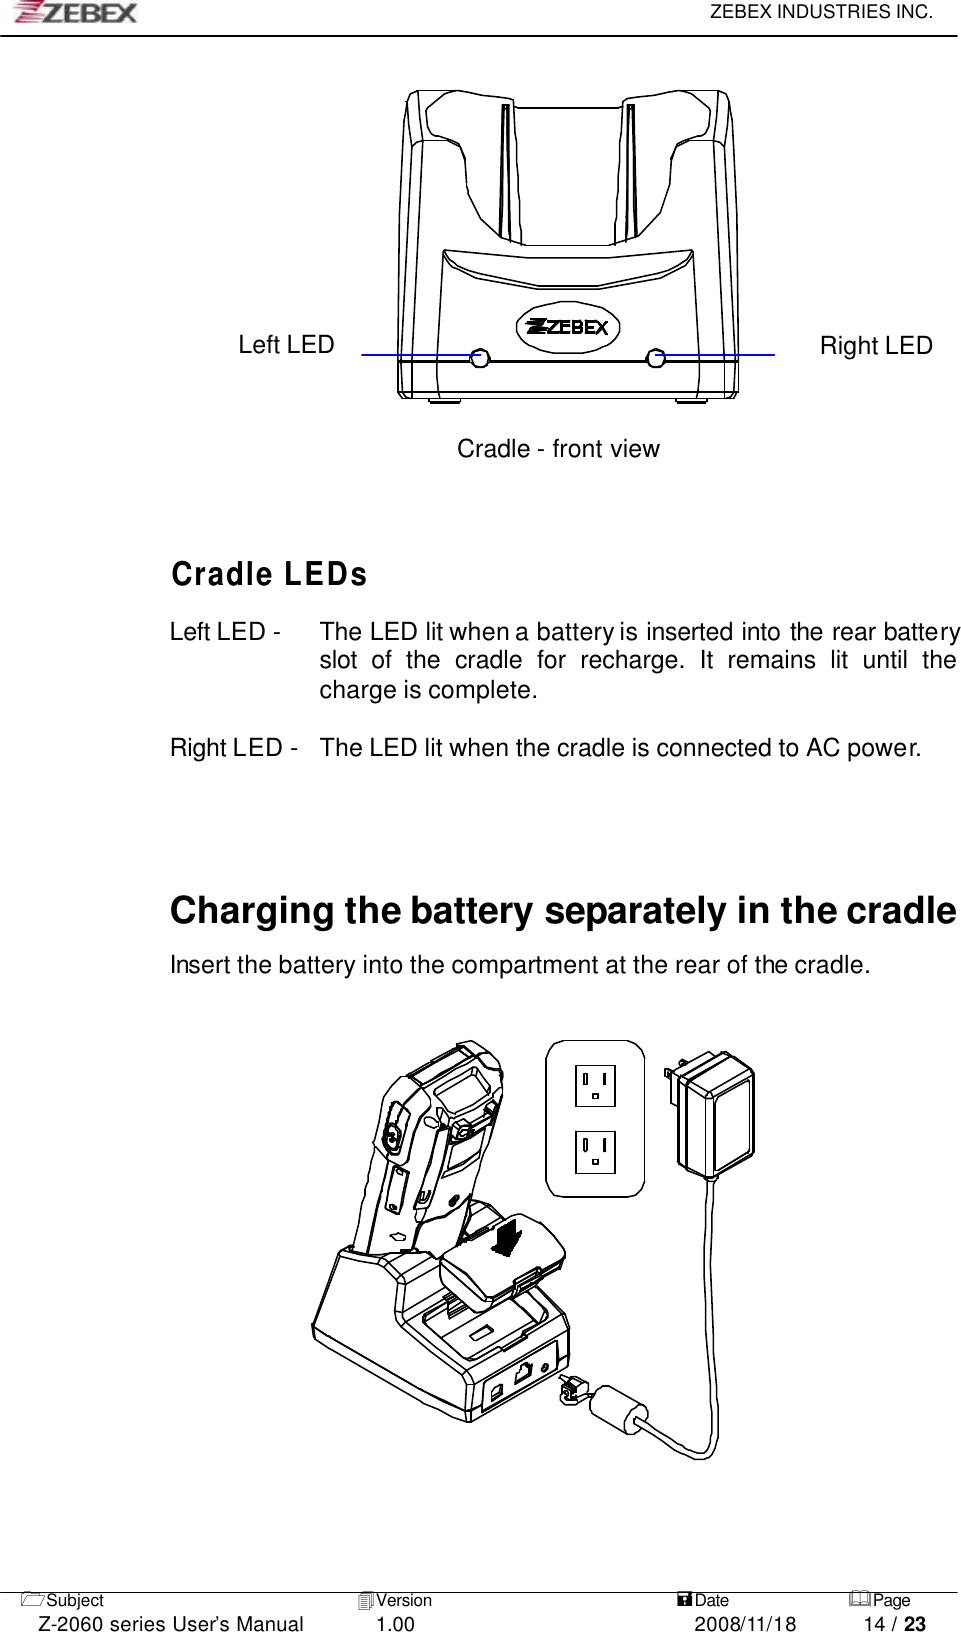     ZEBEX INDUSTRIES INC.   1Subject 4Version   =Date &amp;Page  Z-2060 series User’s Manual 1.00 2008/11/18 14 / 23              Left LED Right LED     Cradle - front view      Cradle LEDs  Left LED -    The LED lit when a battery is inserted into the rear battery slot  of the cradle for recharge. It remains lit until the charge is complete.  Right LED -   The LED lit when the cradle is connected to AC power.    Charging the battery separately in the cradle  Insert the battery into the compartment at the rear of the cradle.                     